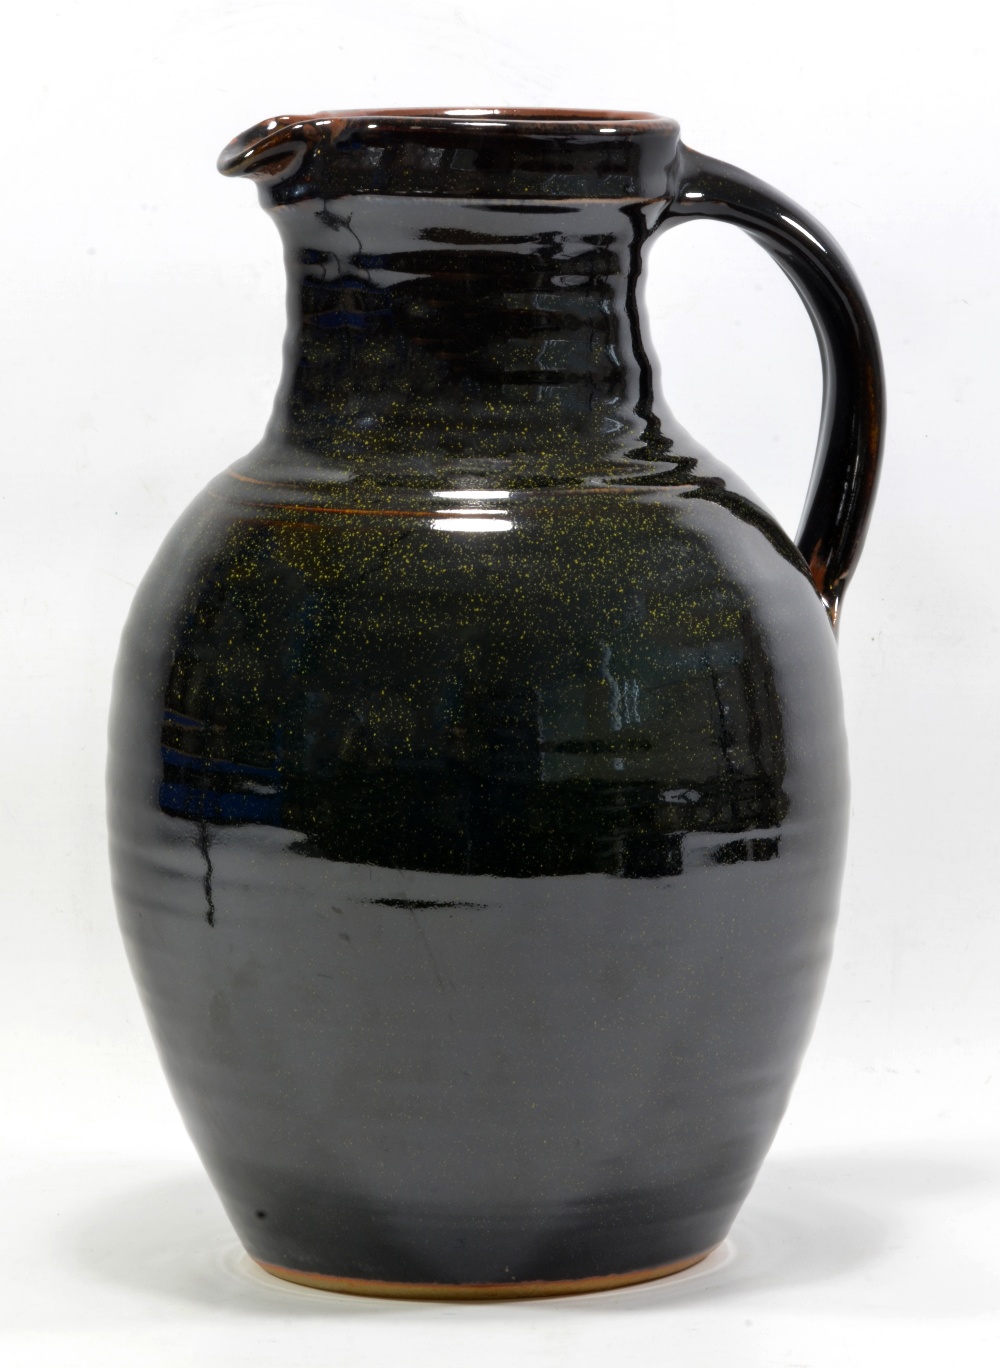 RAY FINCH (1914-2012) for Winchcombe Pottery; a large stoneware jug covered in tenmoku glaze,